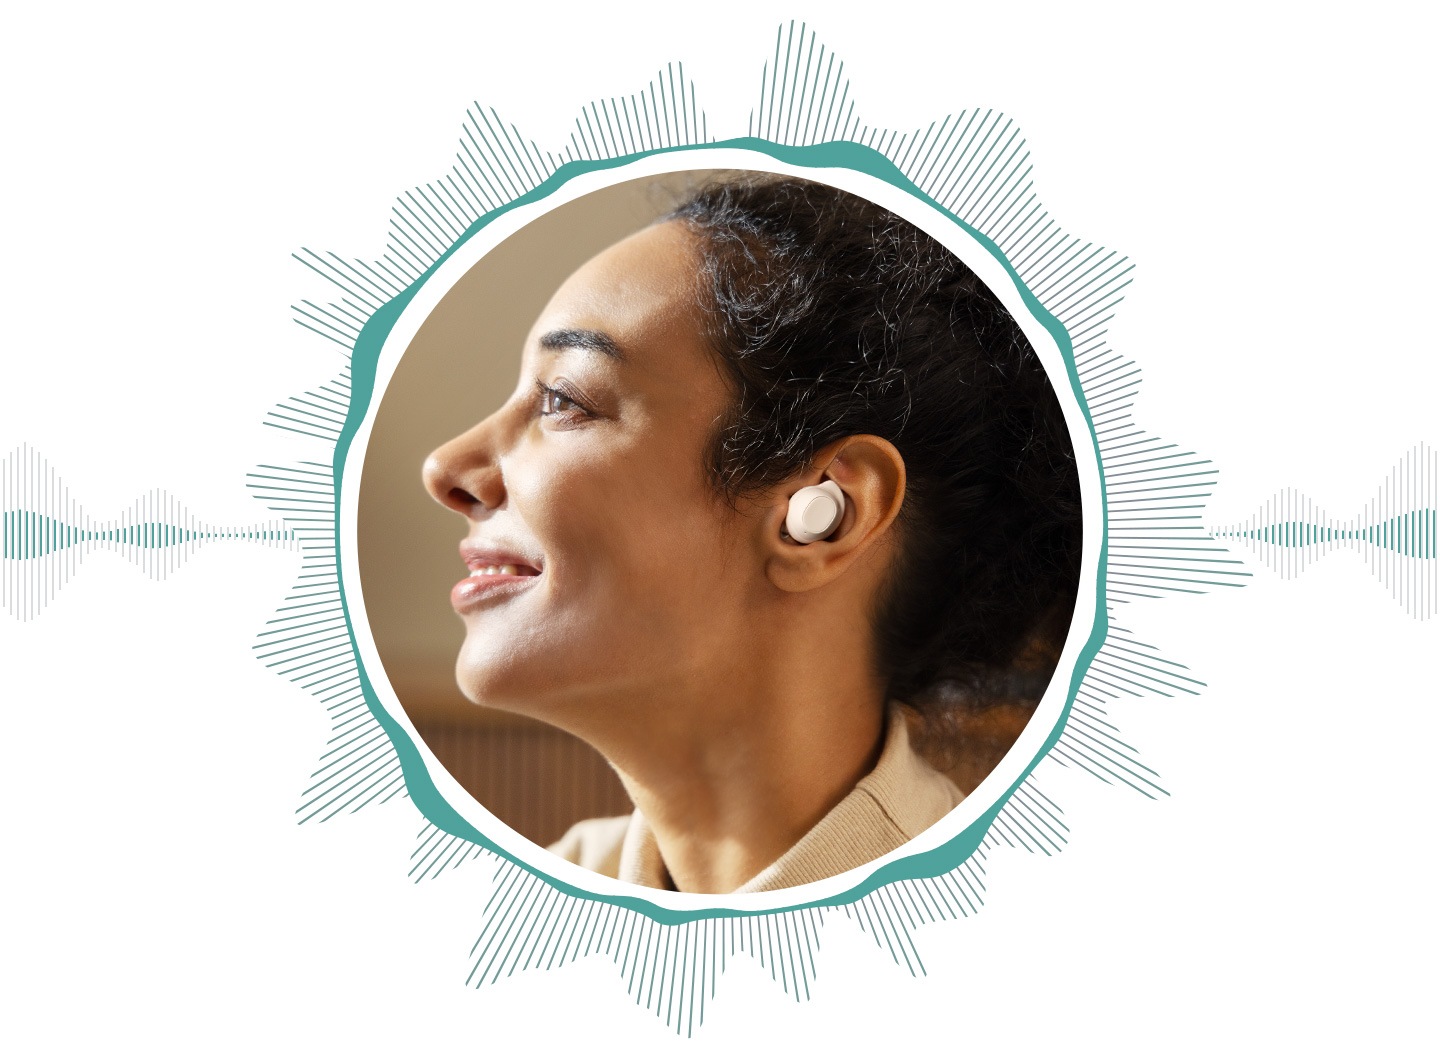 A woman wearing a Galaxy Buds FE in her left ear. Her face is enclosed within a circle of wavelike lines, symbolising the active noise canceling feature of the earbuds.